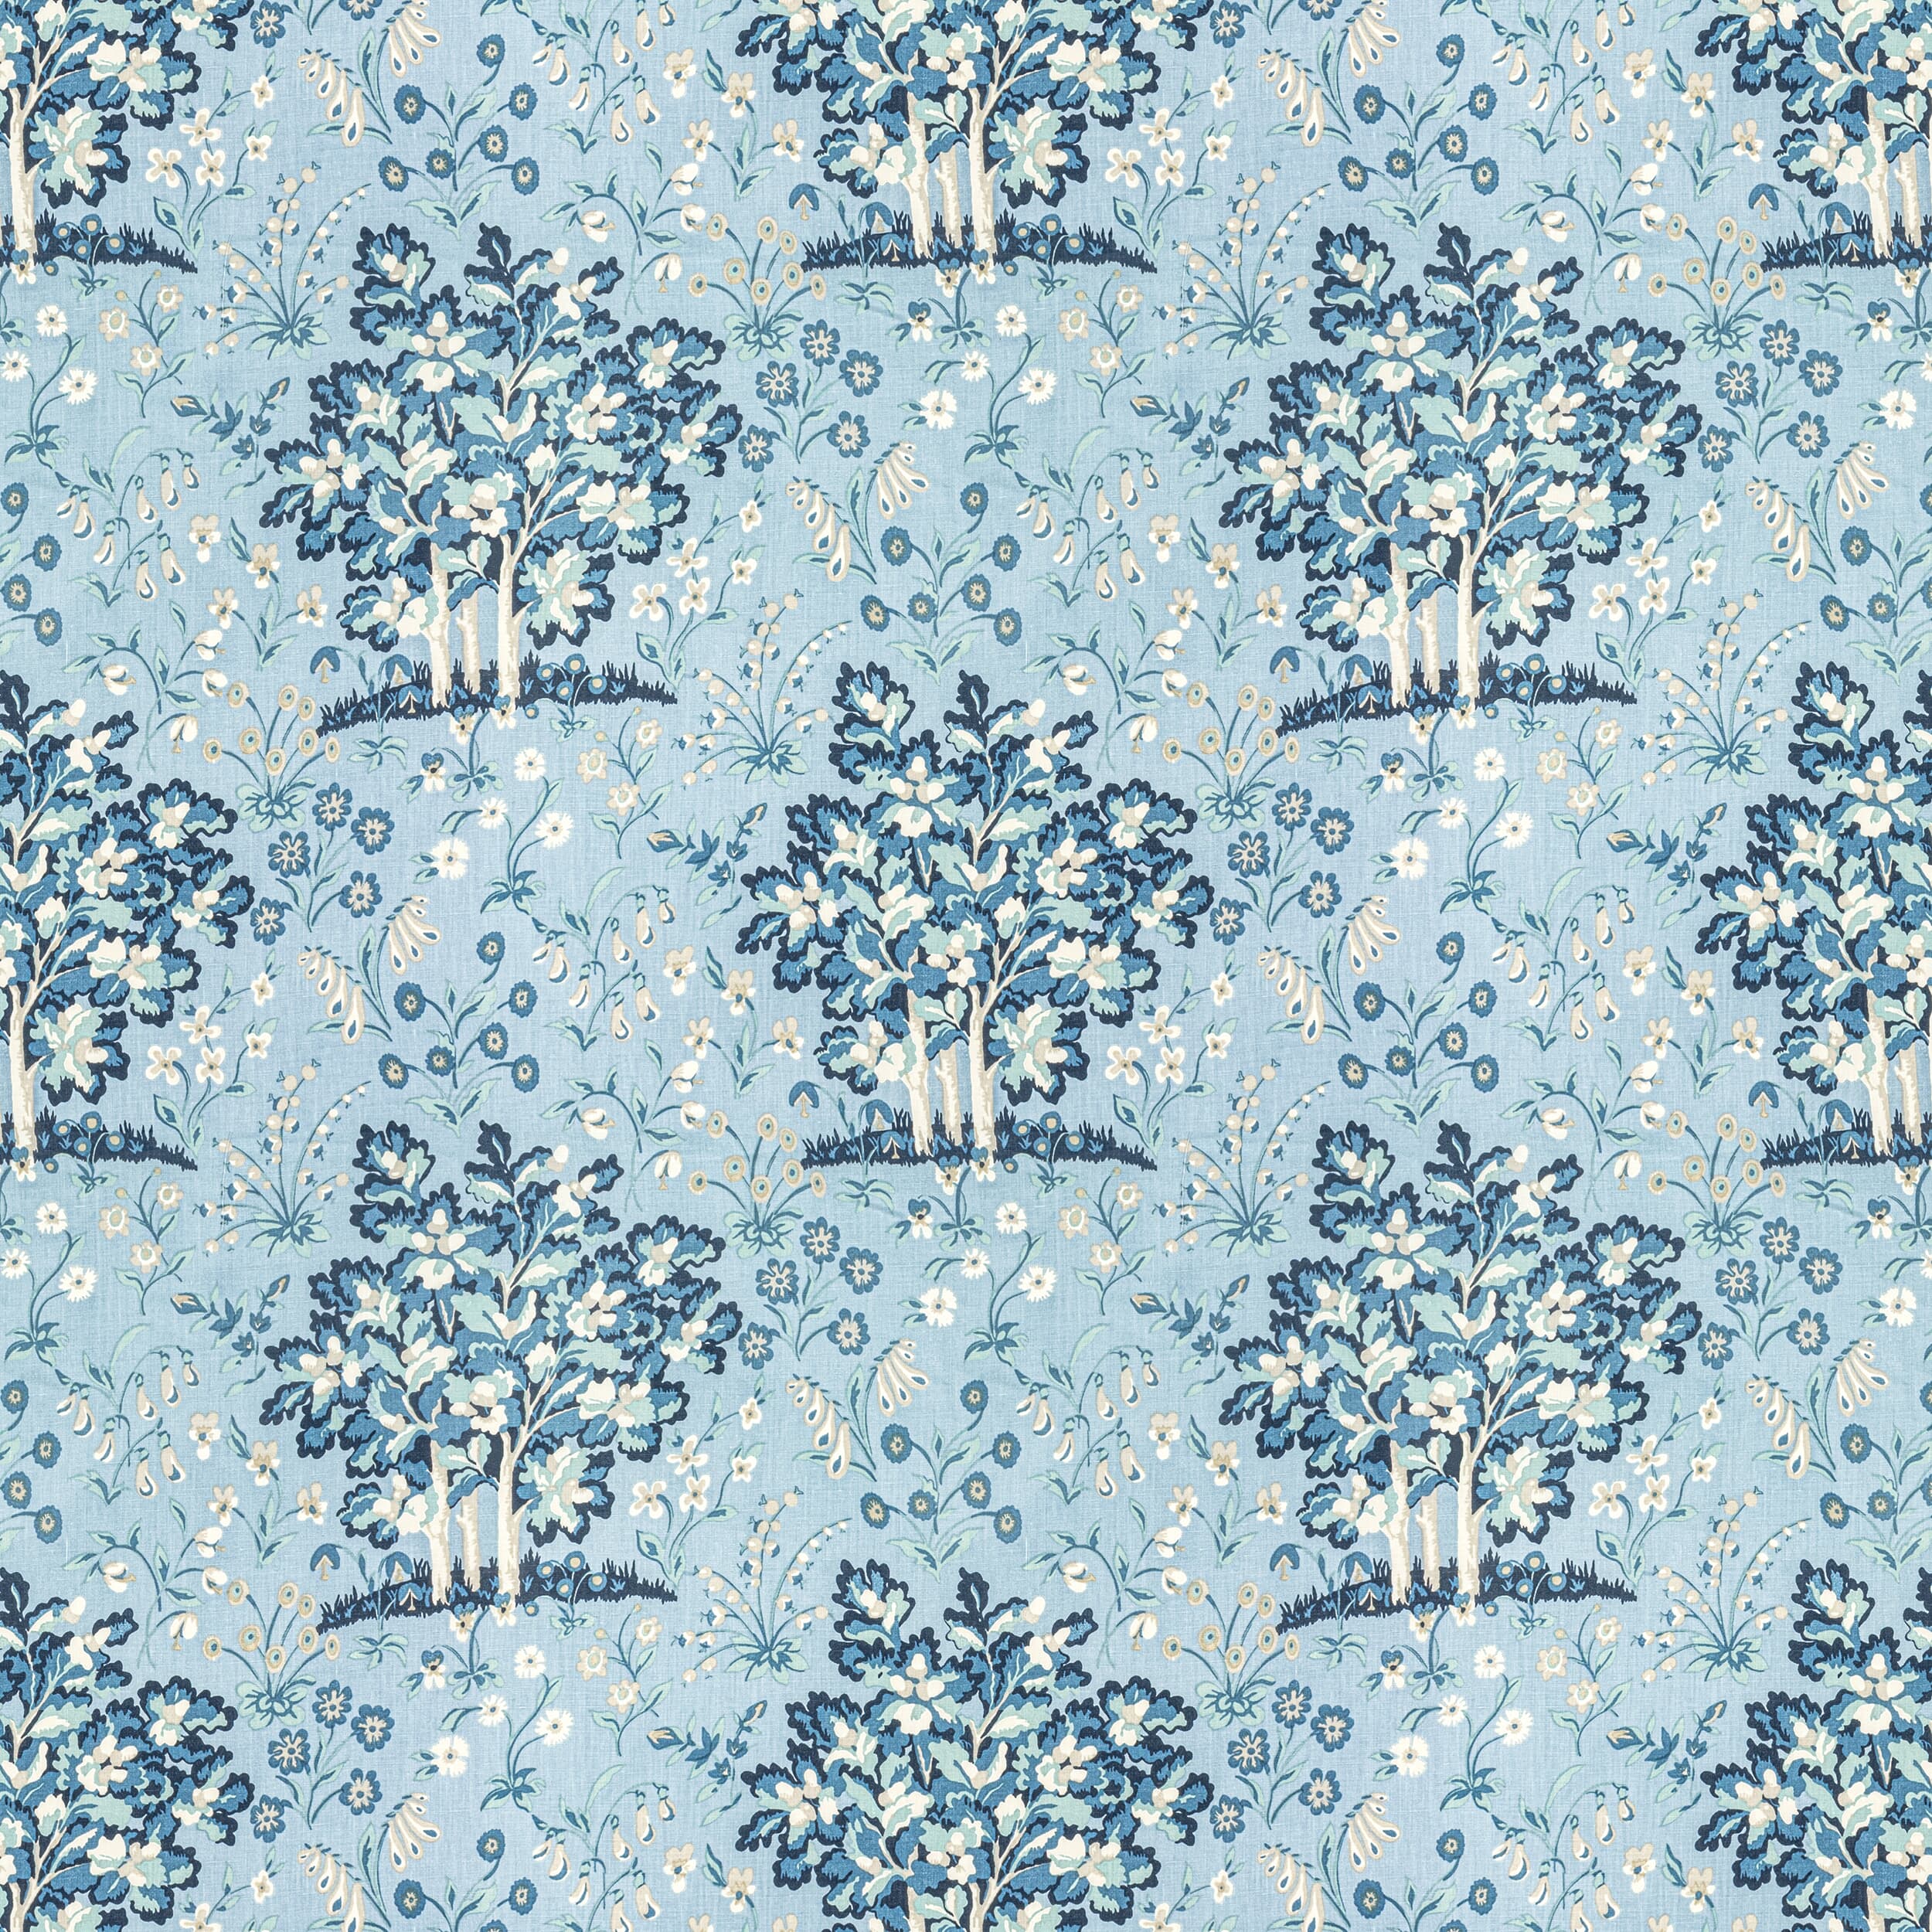 7813-2 Medieval Garden Ocean by Stout Fabric